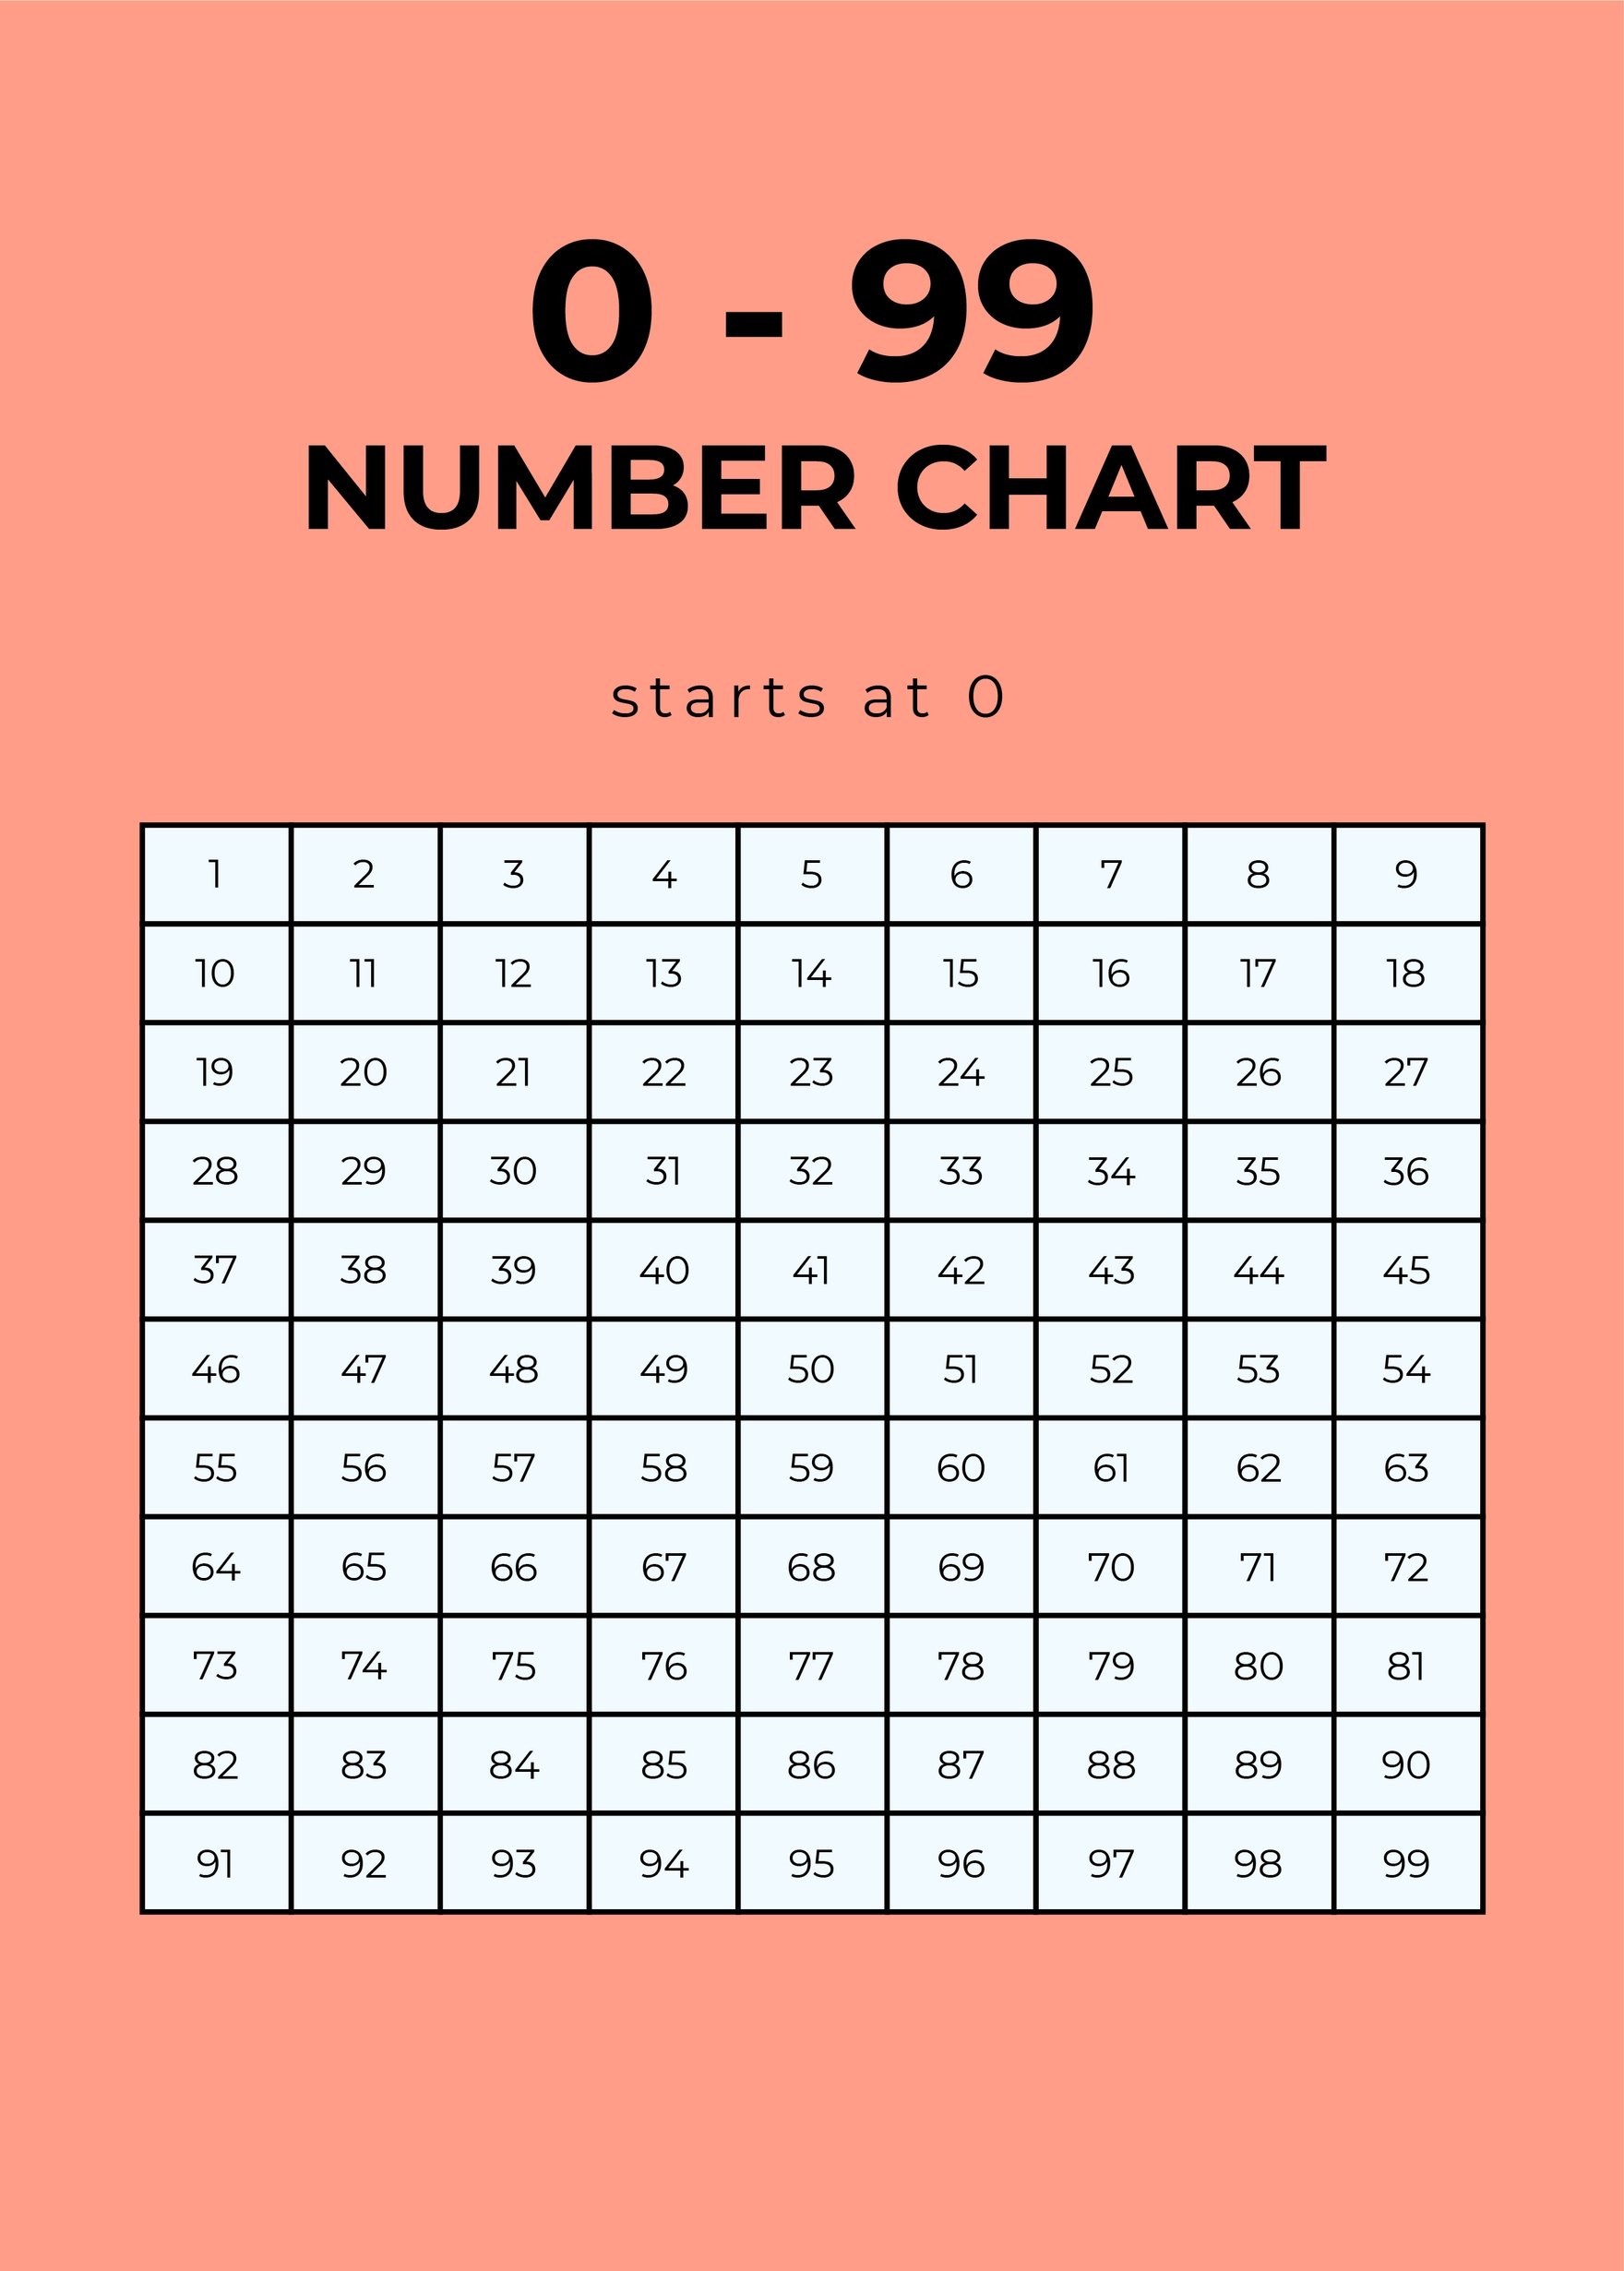 0 - 99 Number Chart